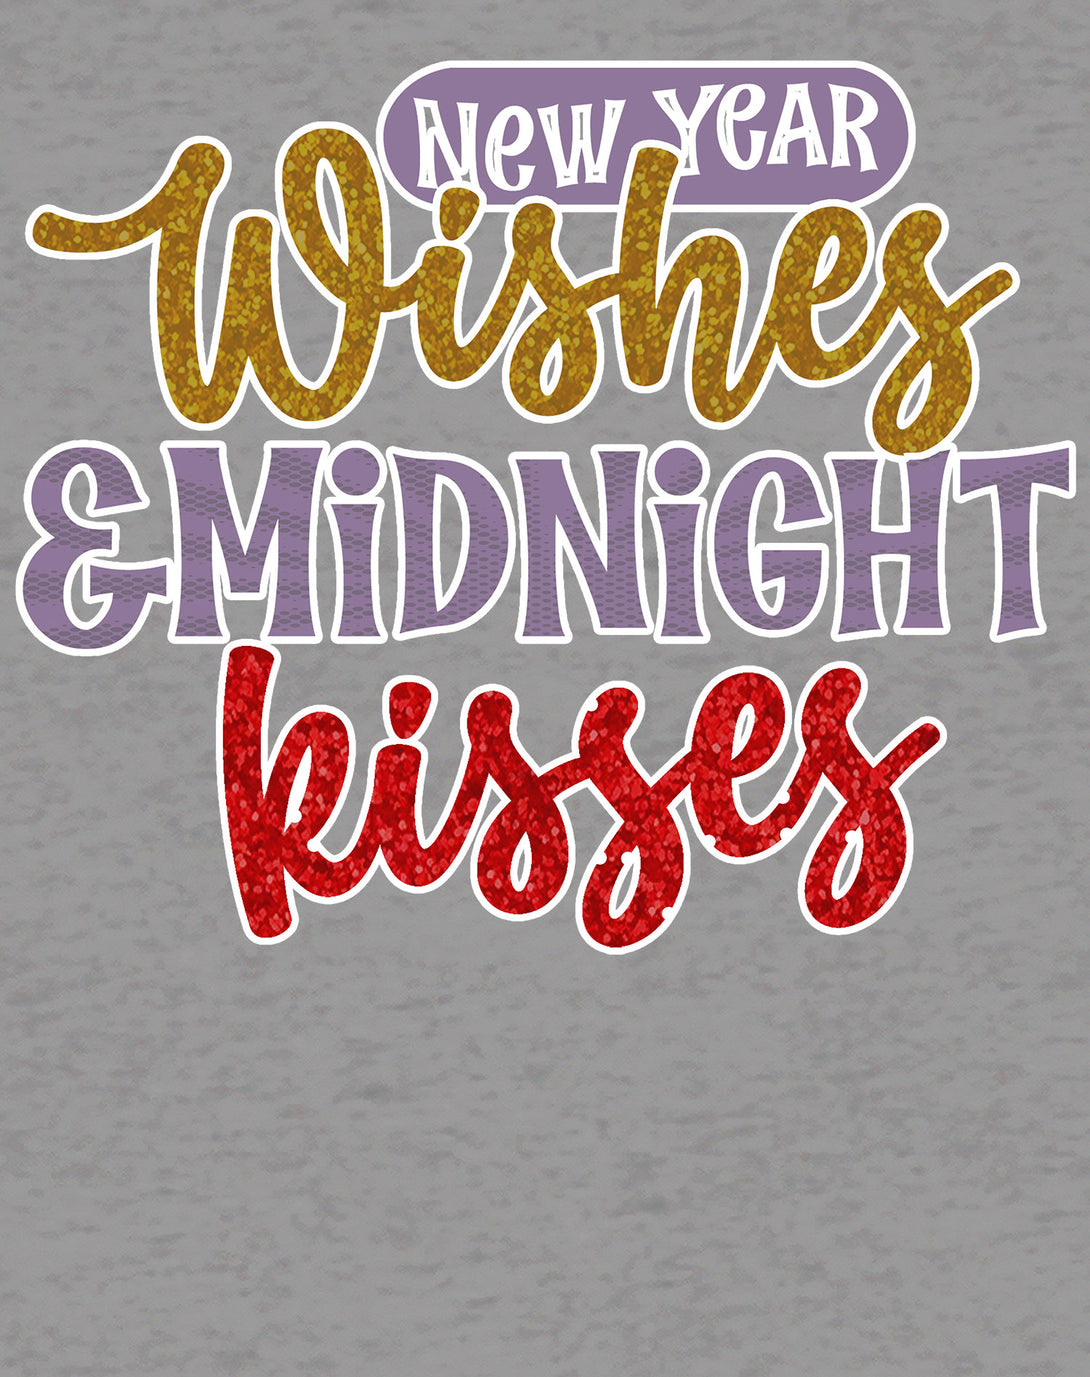 NYE New Year Wishes Midnight Kisses Eve Party Cute Couples Women's T-Shirt Sports Grey - Urban Species Design Close Up